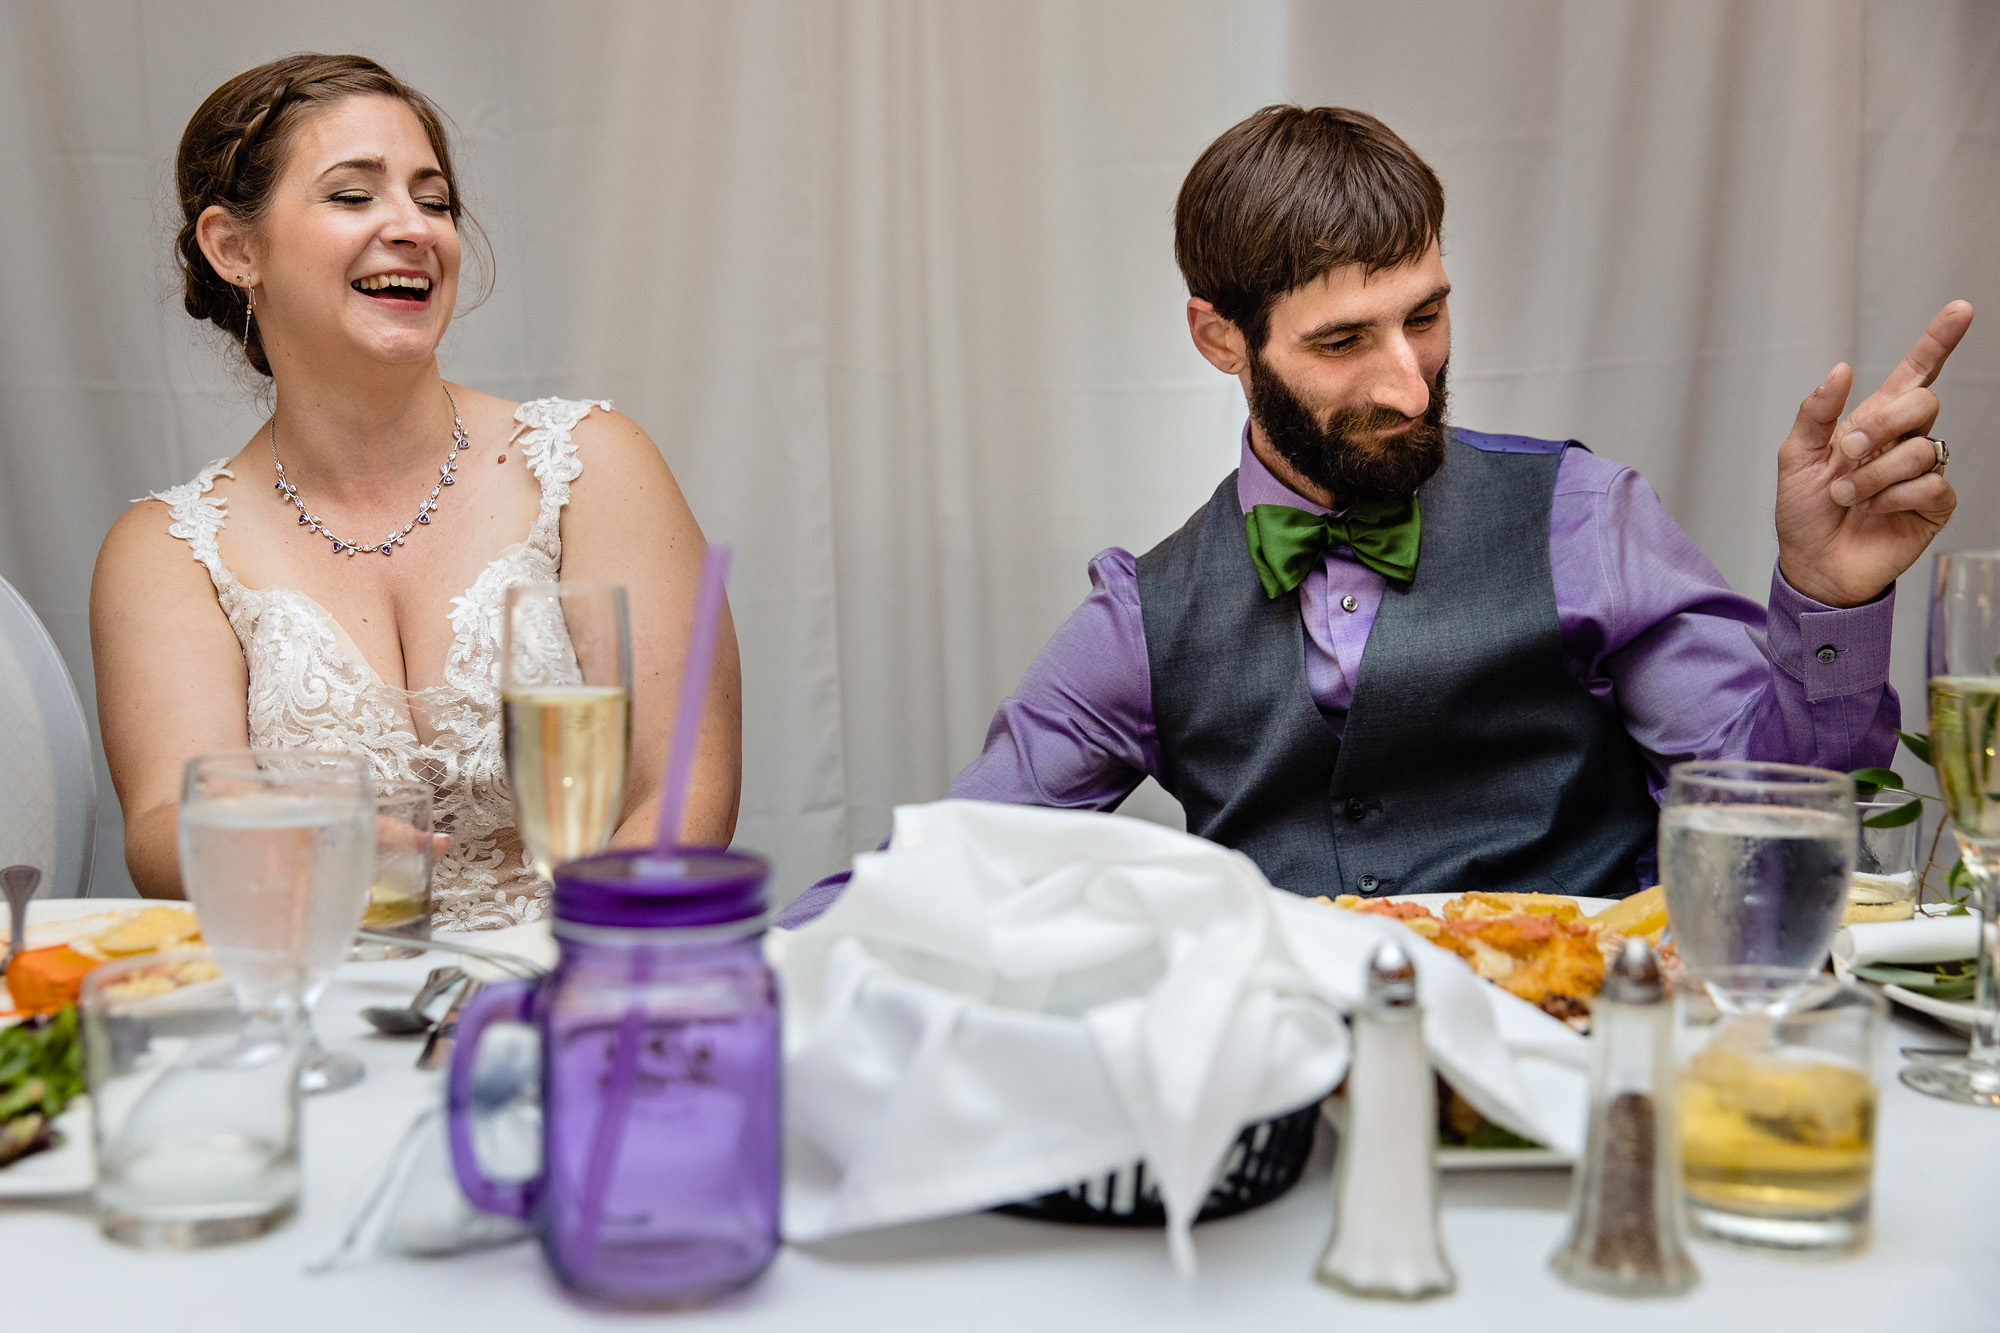 An emotional and fun wedding reception at Atlantic Oceanside in Bar Harbor, Maine